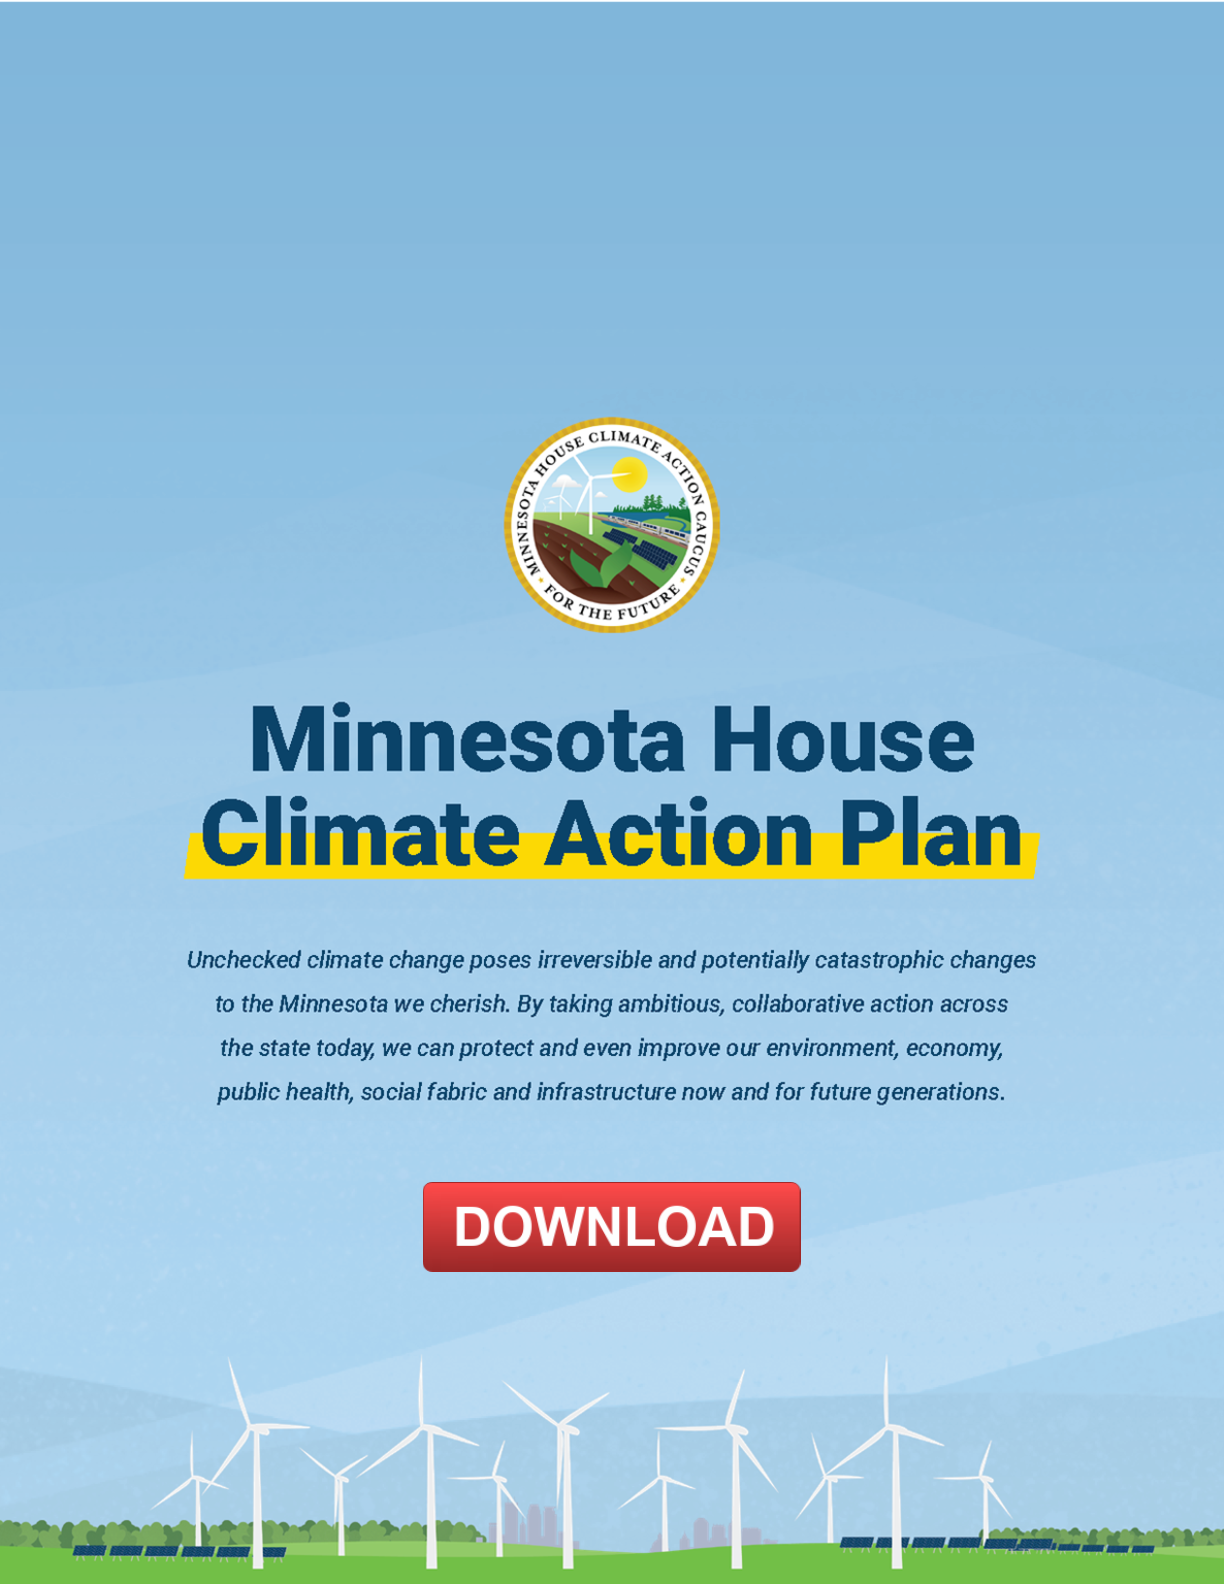 MN Climate Action Plan Image